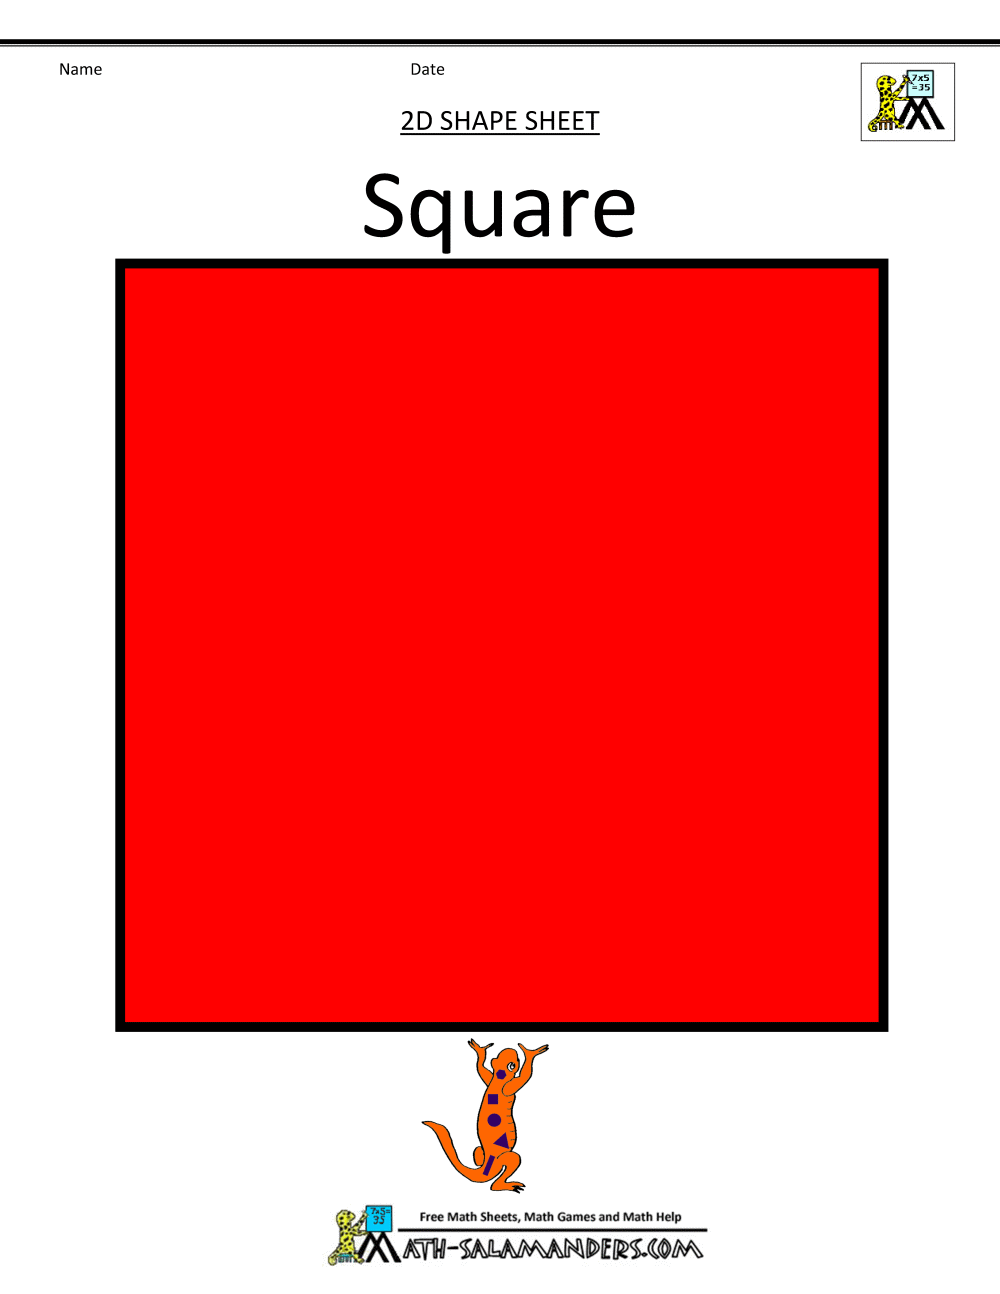 square objects clipart - photo #41